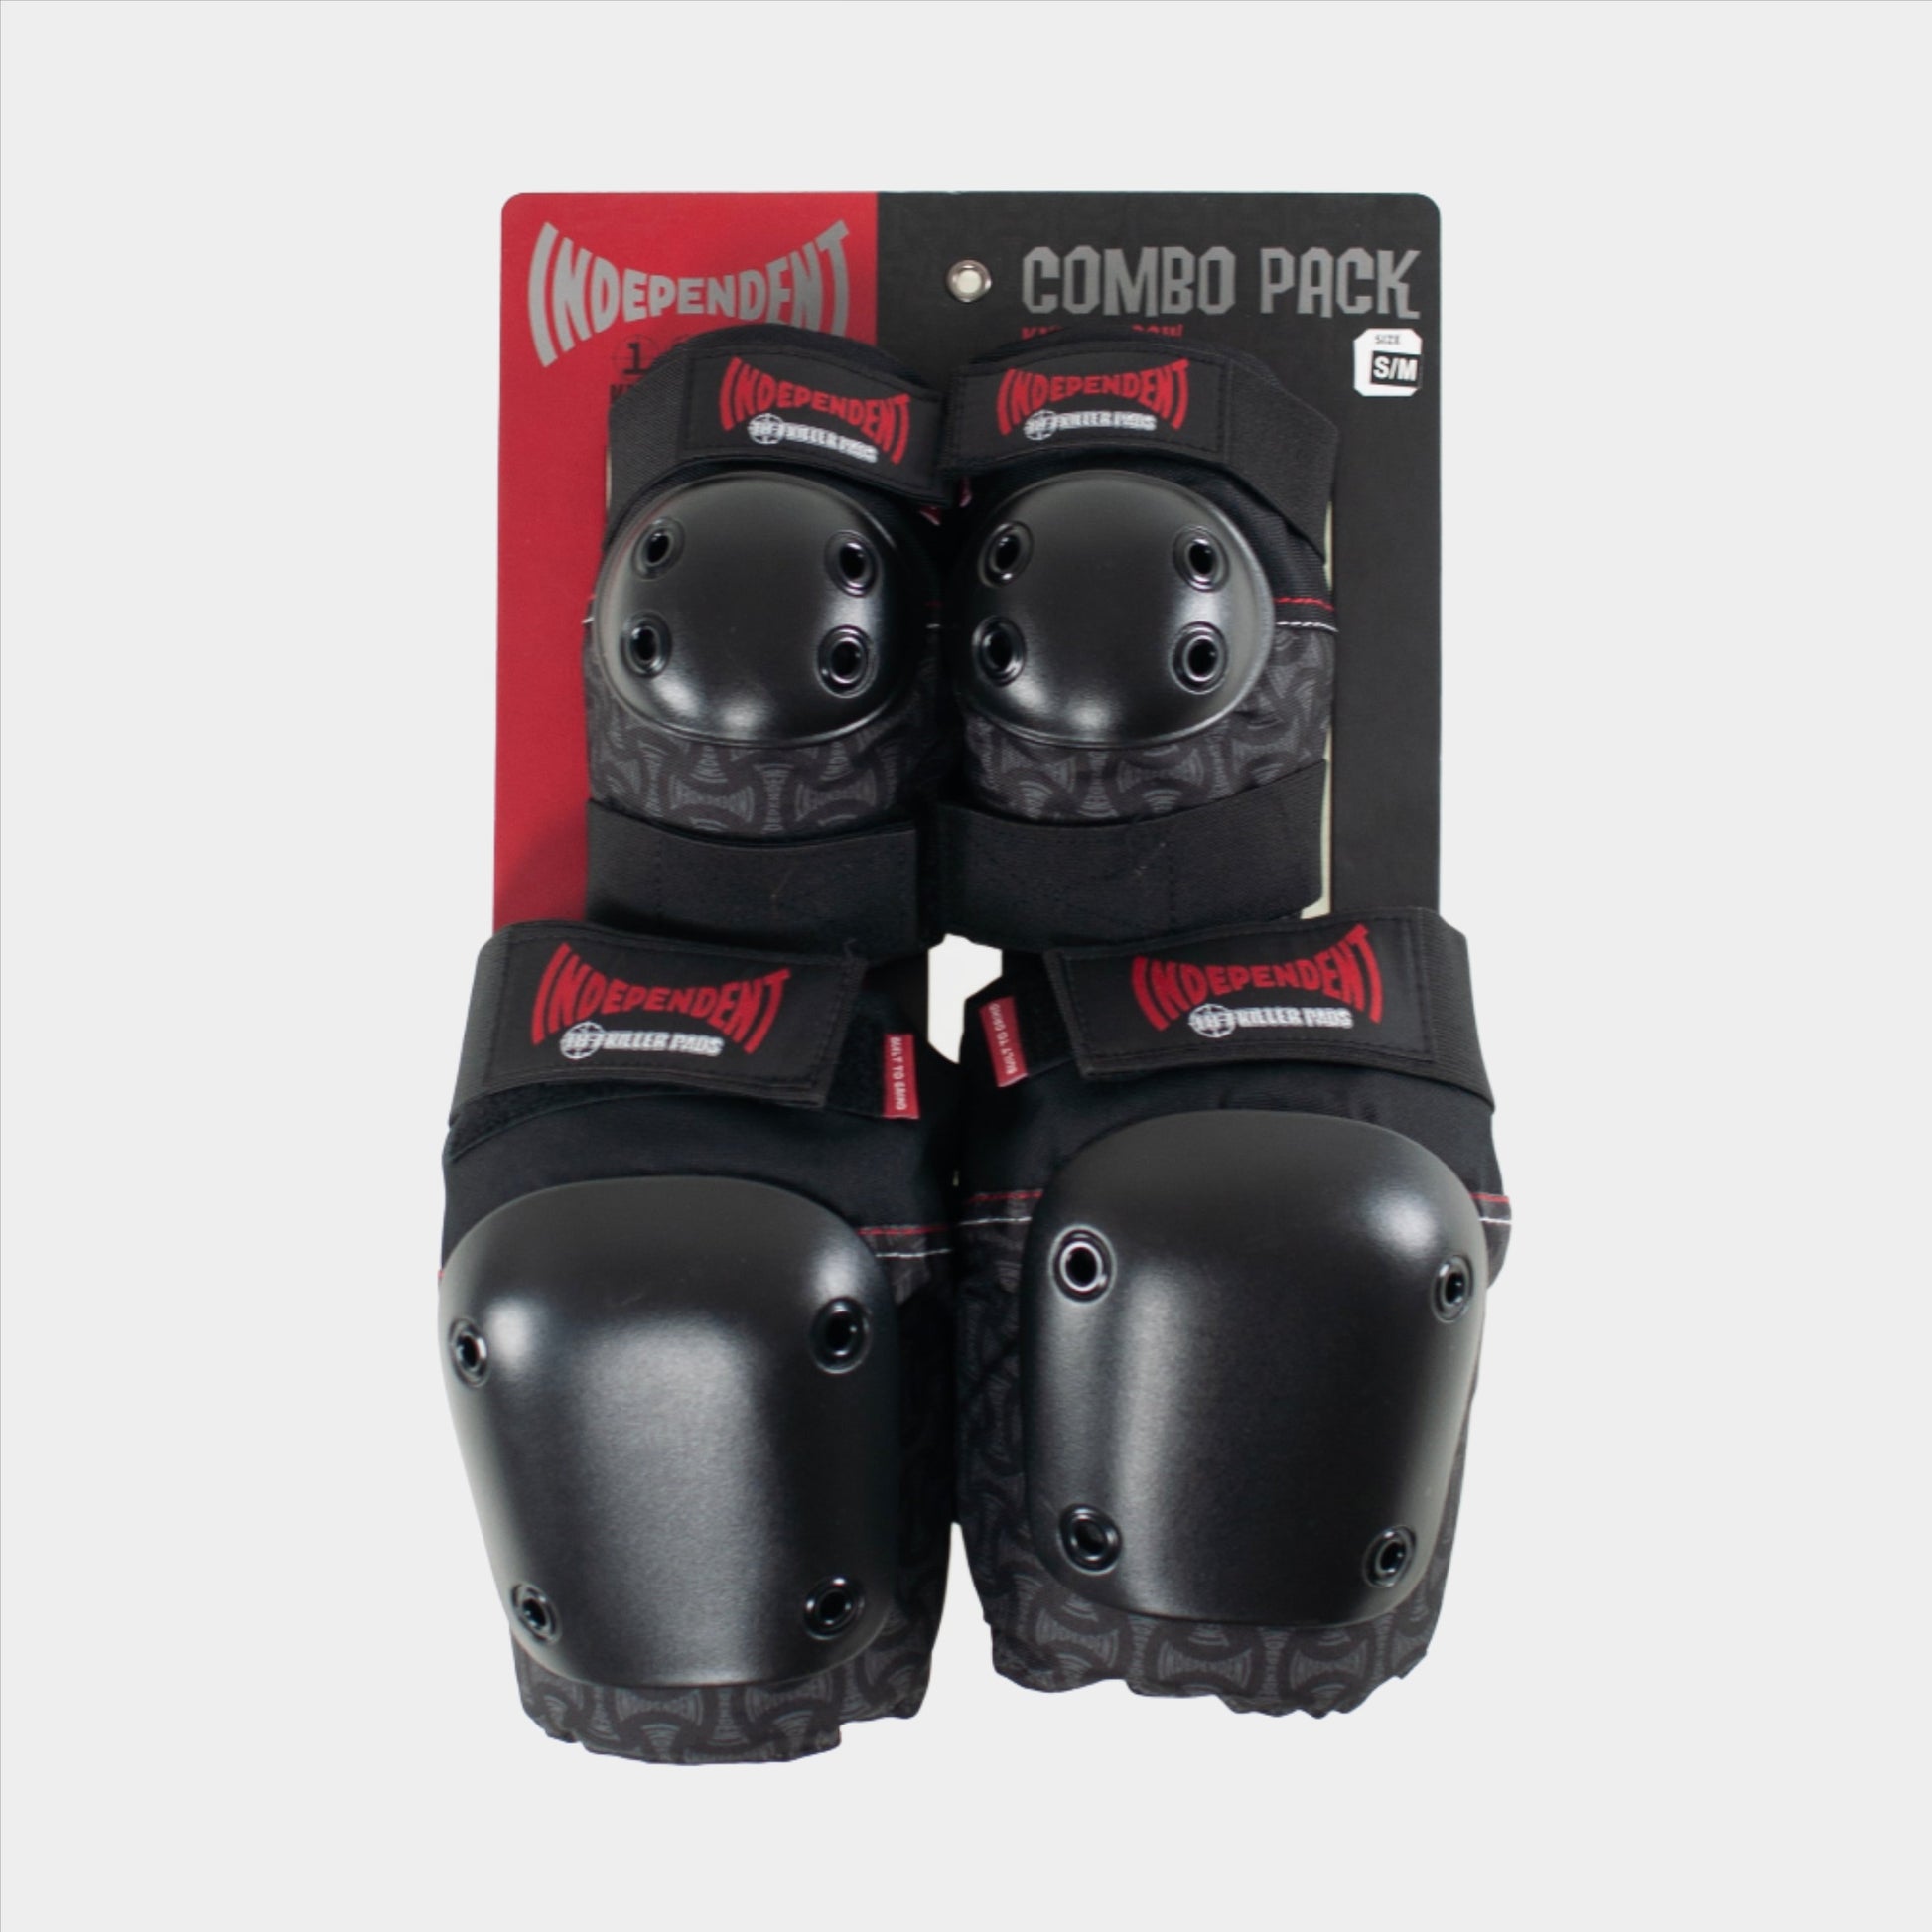 187 Killer Pads x Independent Combo Pack Knee & Elbow HO23 Quick Strike - Prime Delux Store